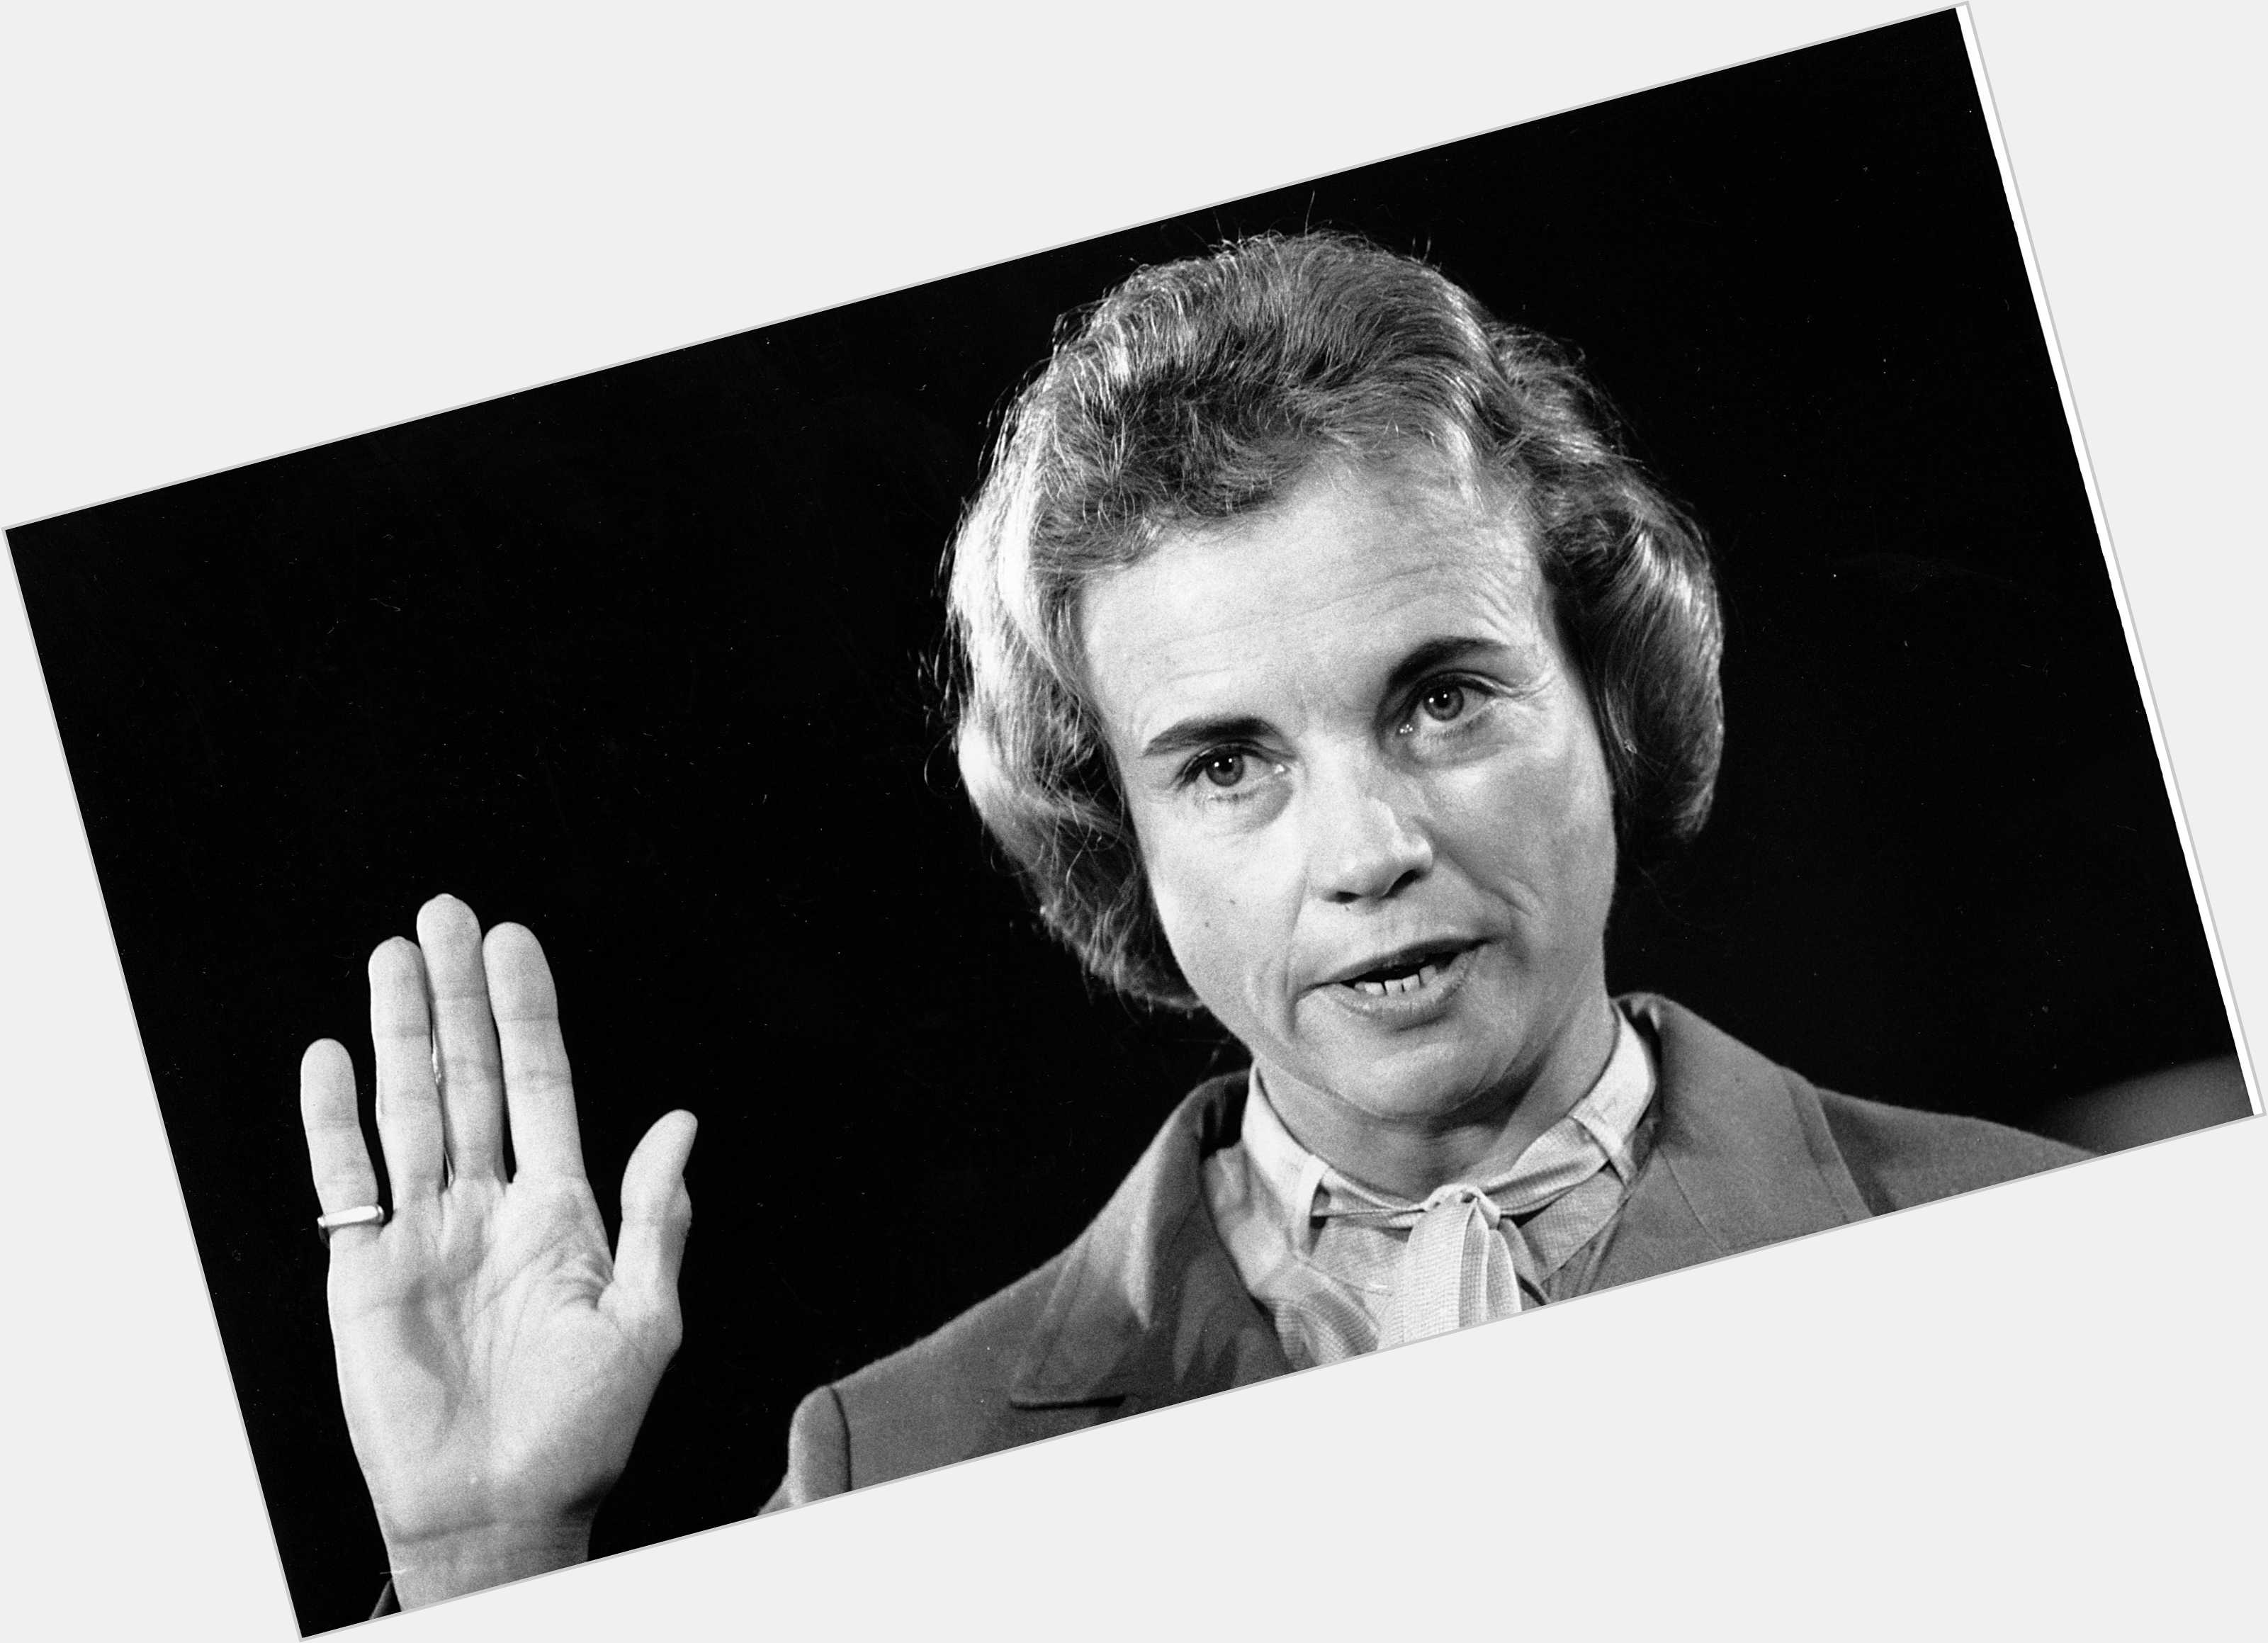 Http://fanpagepress.net/m/S/Sandra Day O Connor New Pic 1